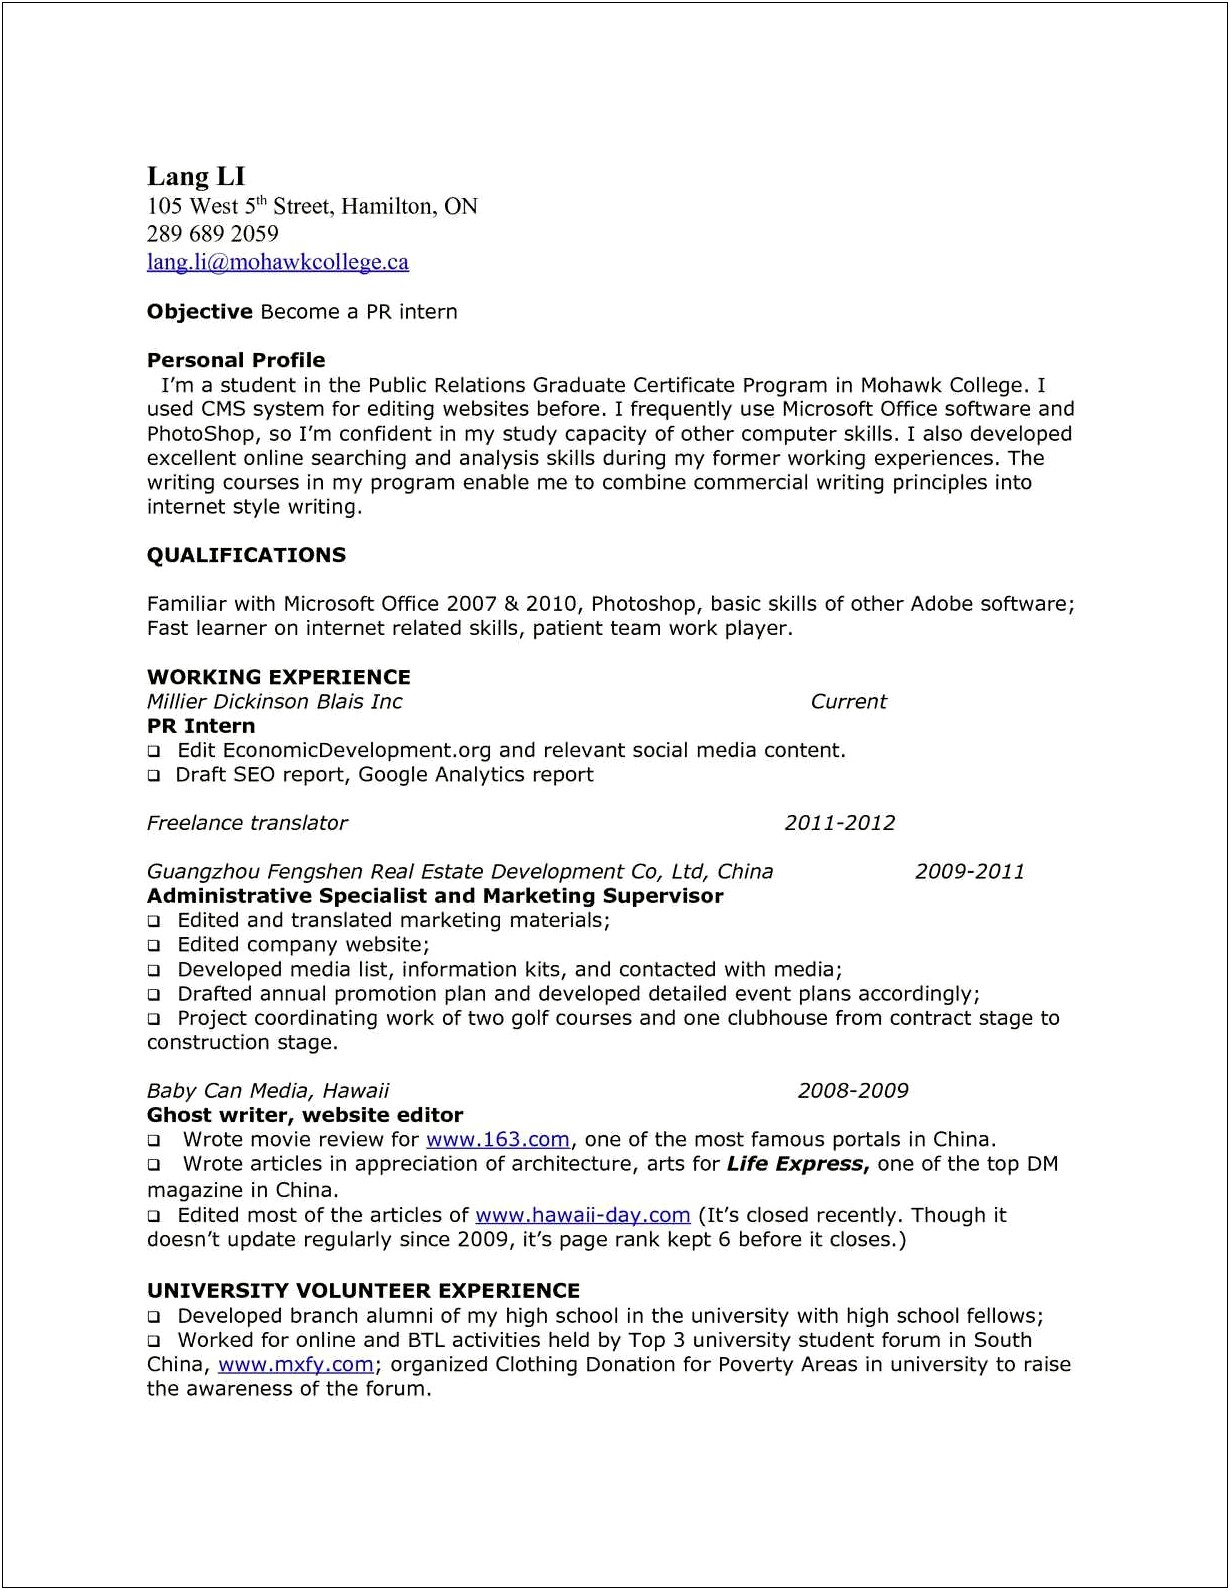 Translating Life Experience In A Job Resume